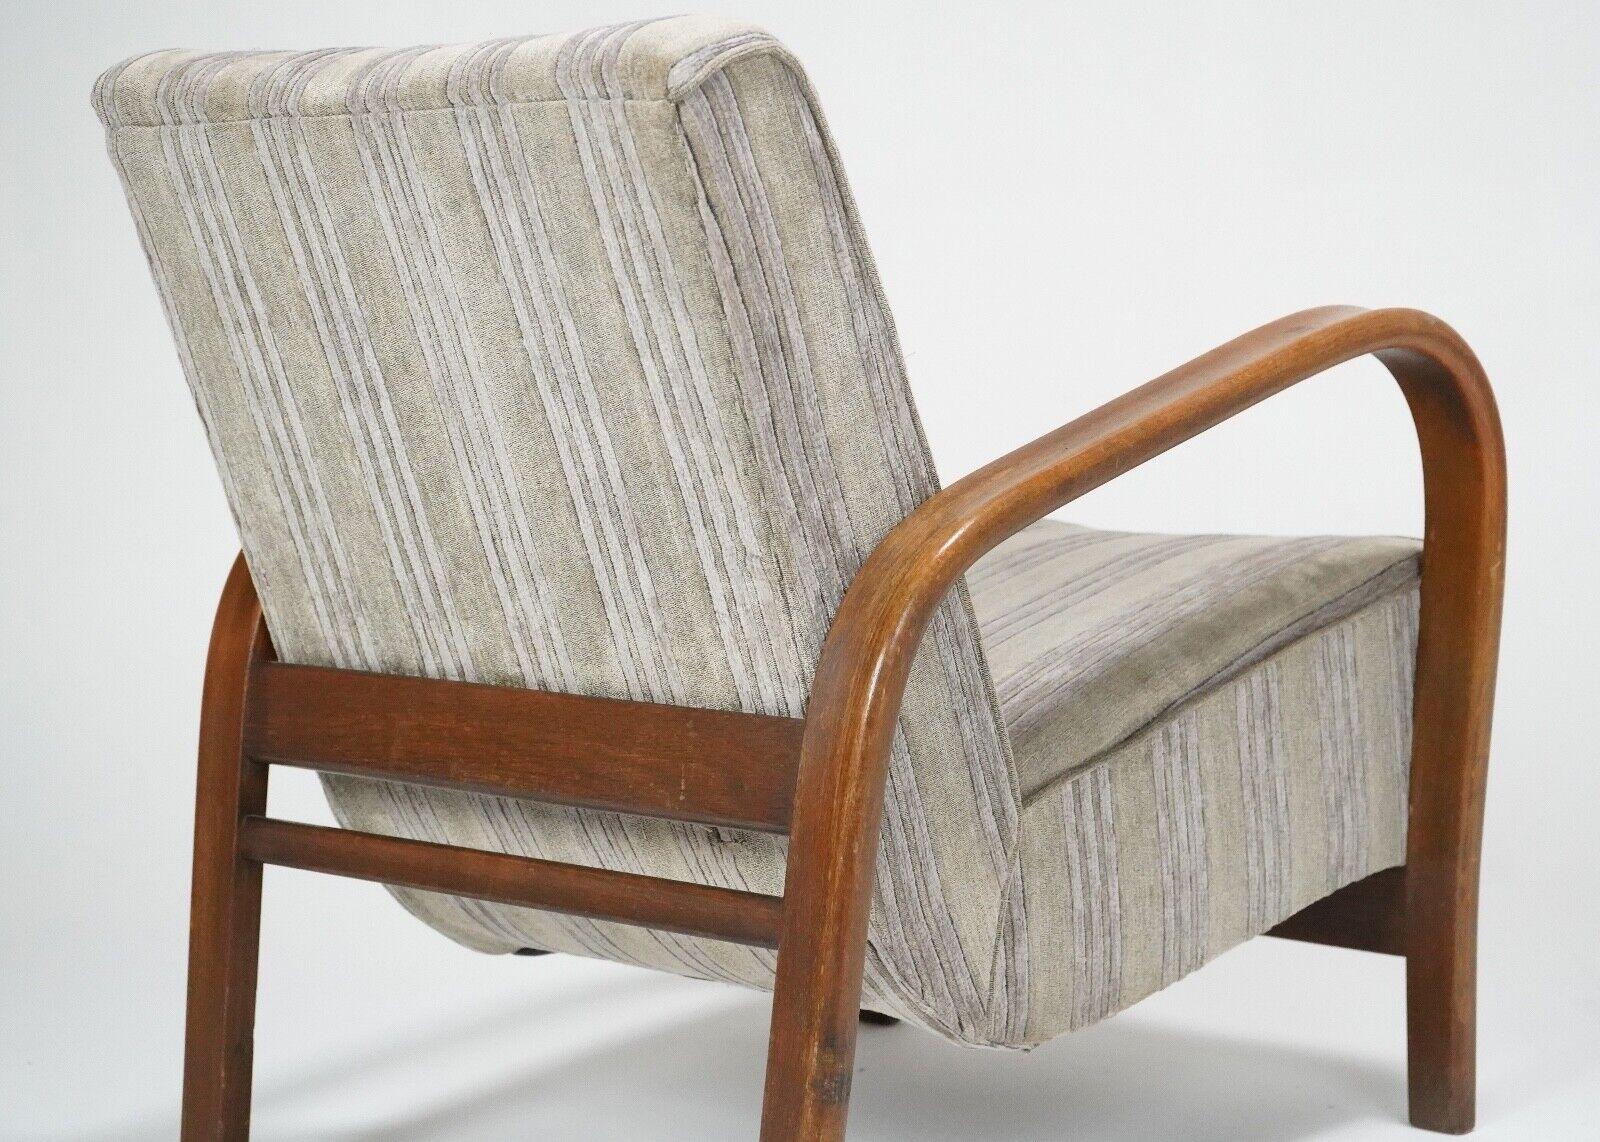 A Bentwood armchair by Kozelka and Kropacek for interior praha, circa 1950. 
In good all round condition, left in its original upholstery, spring core in perfect condition, very study and comfortable. 

Dimensions

H 77cm W 67cm D 78cm SH 44cm
